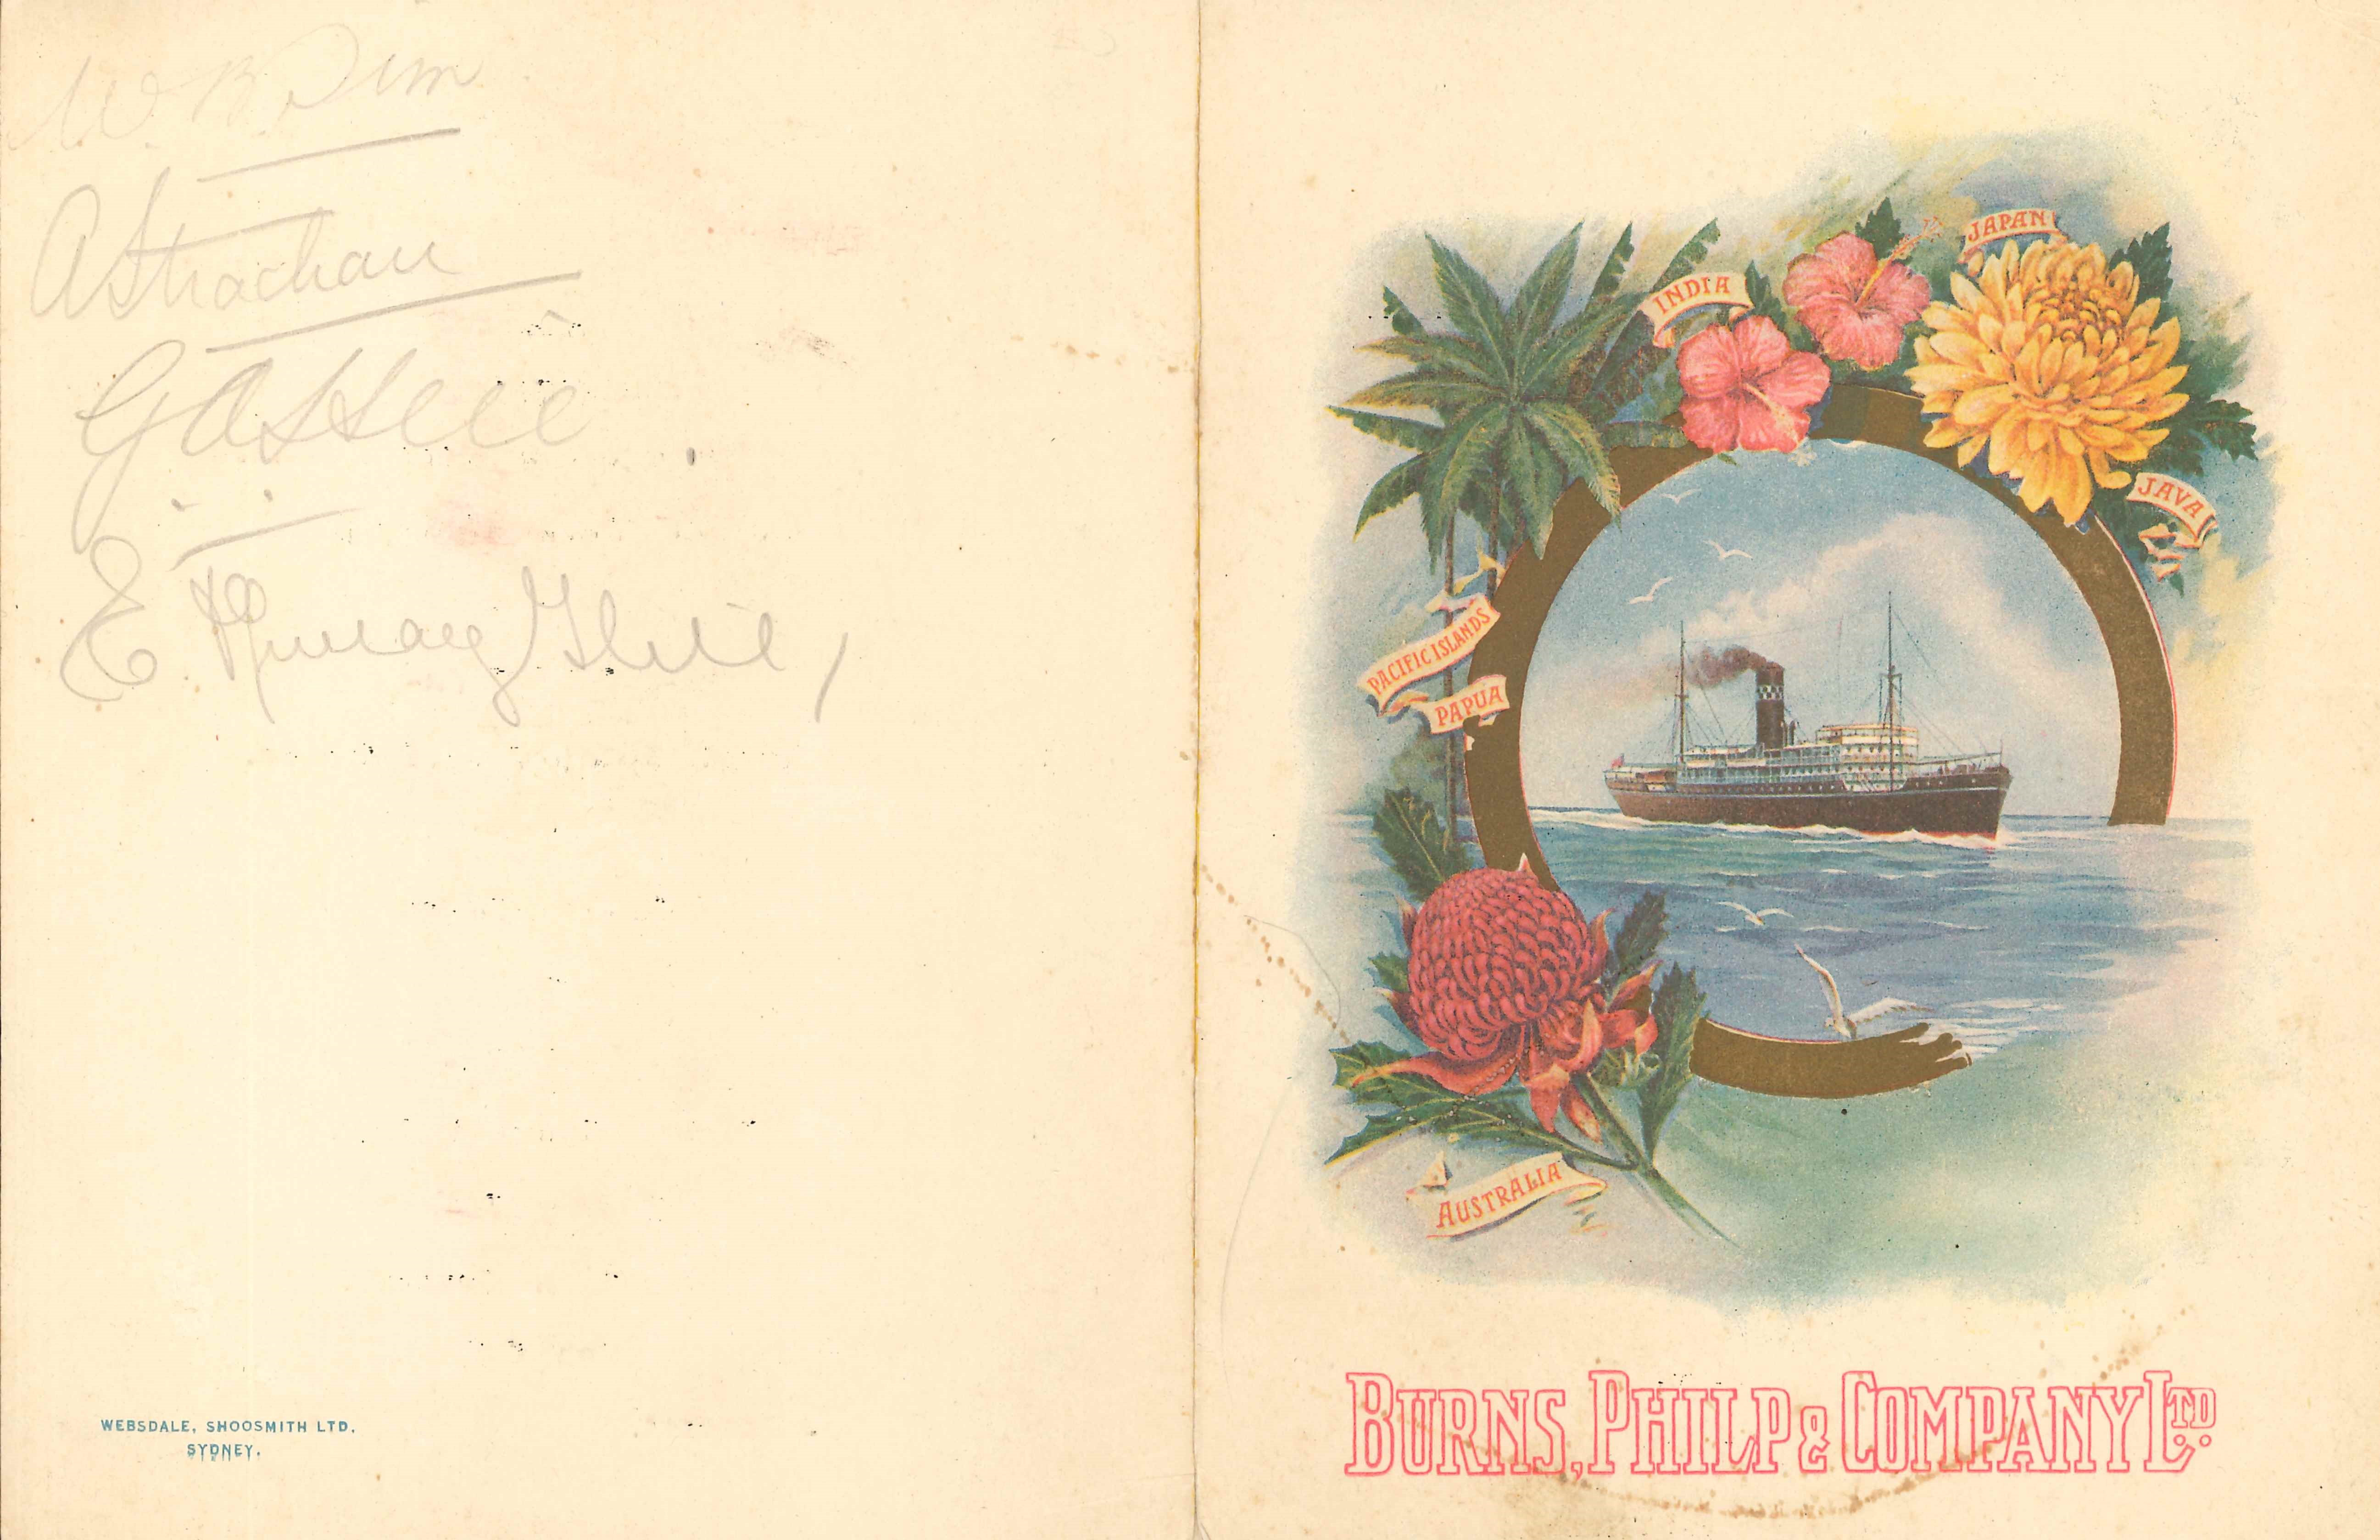 Picture of the SS Mataram dinner menu cover featuring an image of the ship on the water with a floral border.